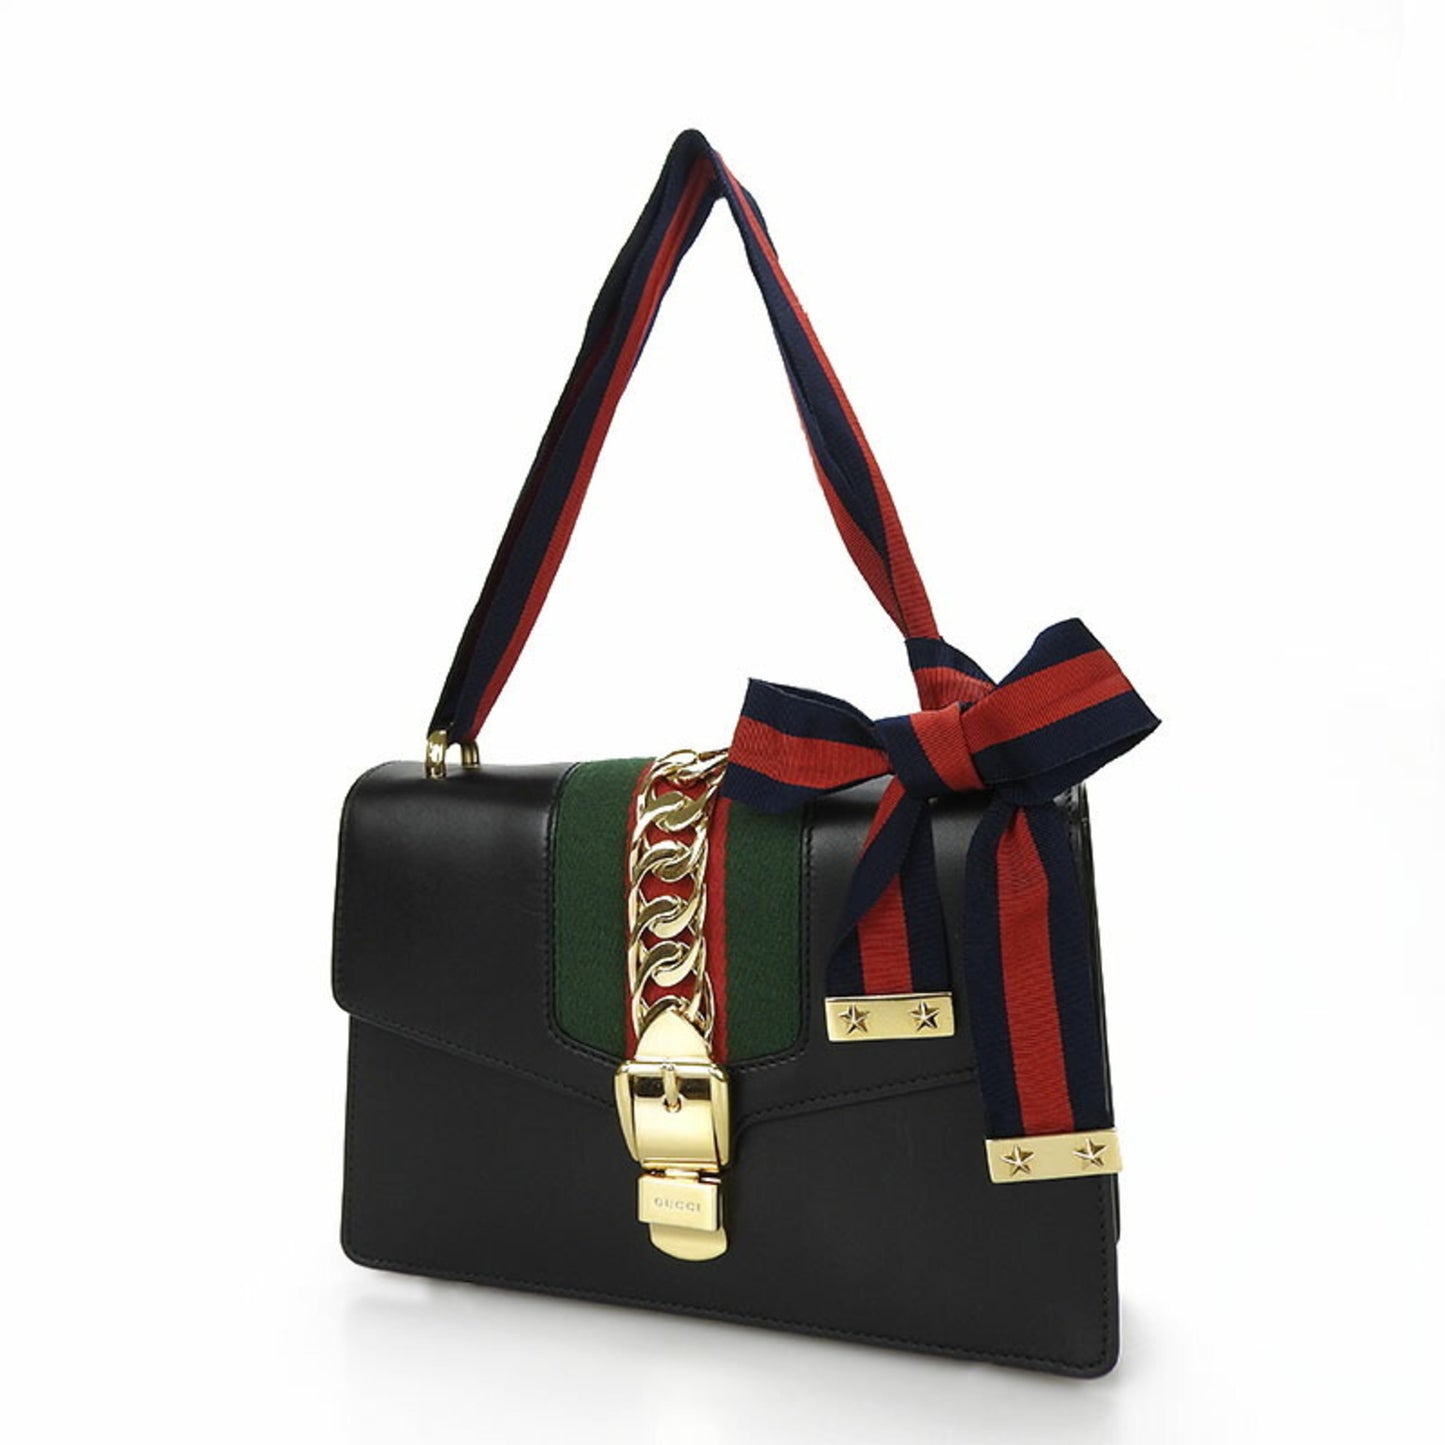 Gucci Women's Sophisticated Leather Tote Bag in Black